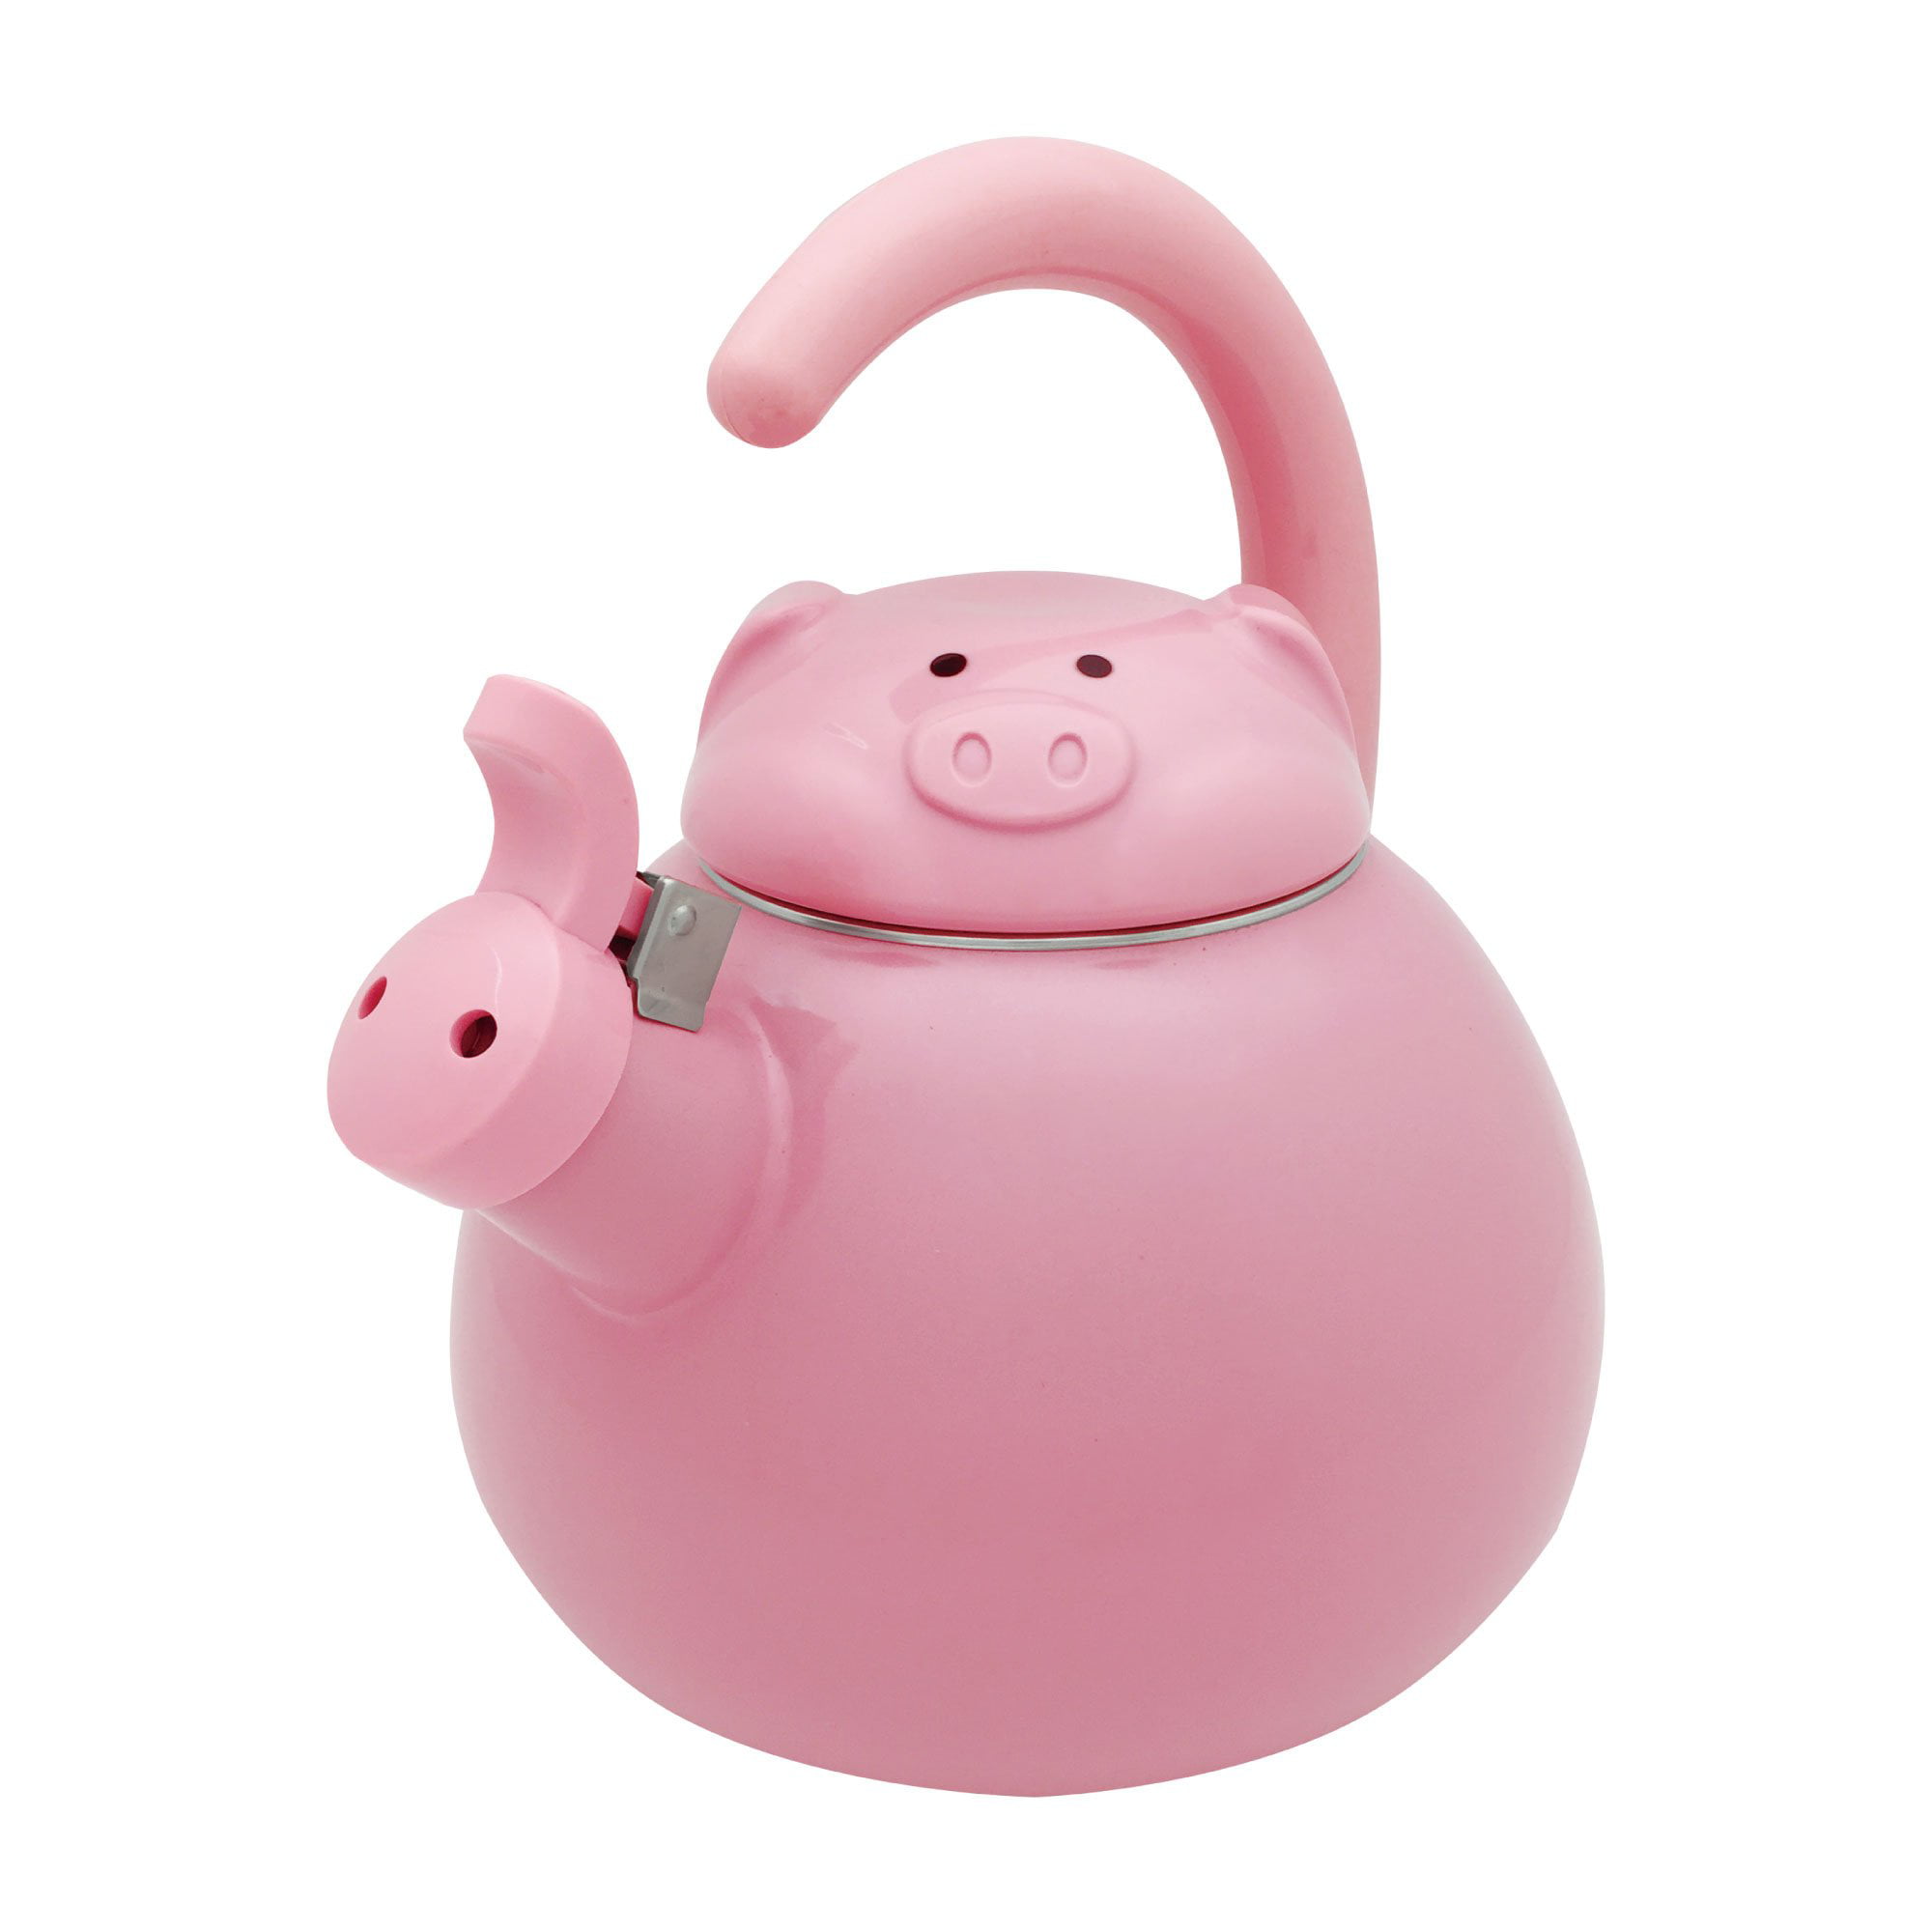 Very Cute Vintage Kamenstein Whistling Pink Pig Tea Kettle Teapot -  antiques - by owner - collectibles sale - craigslist